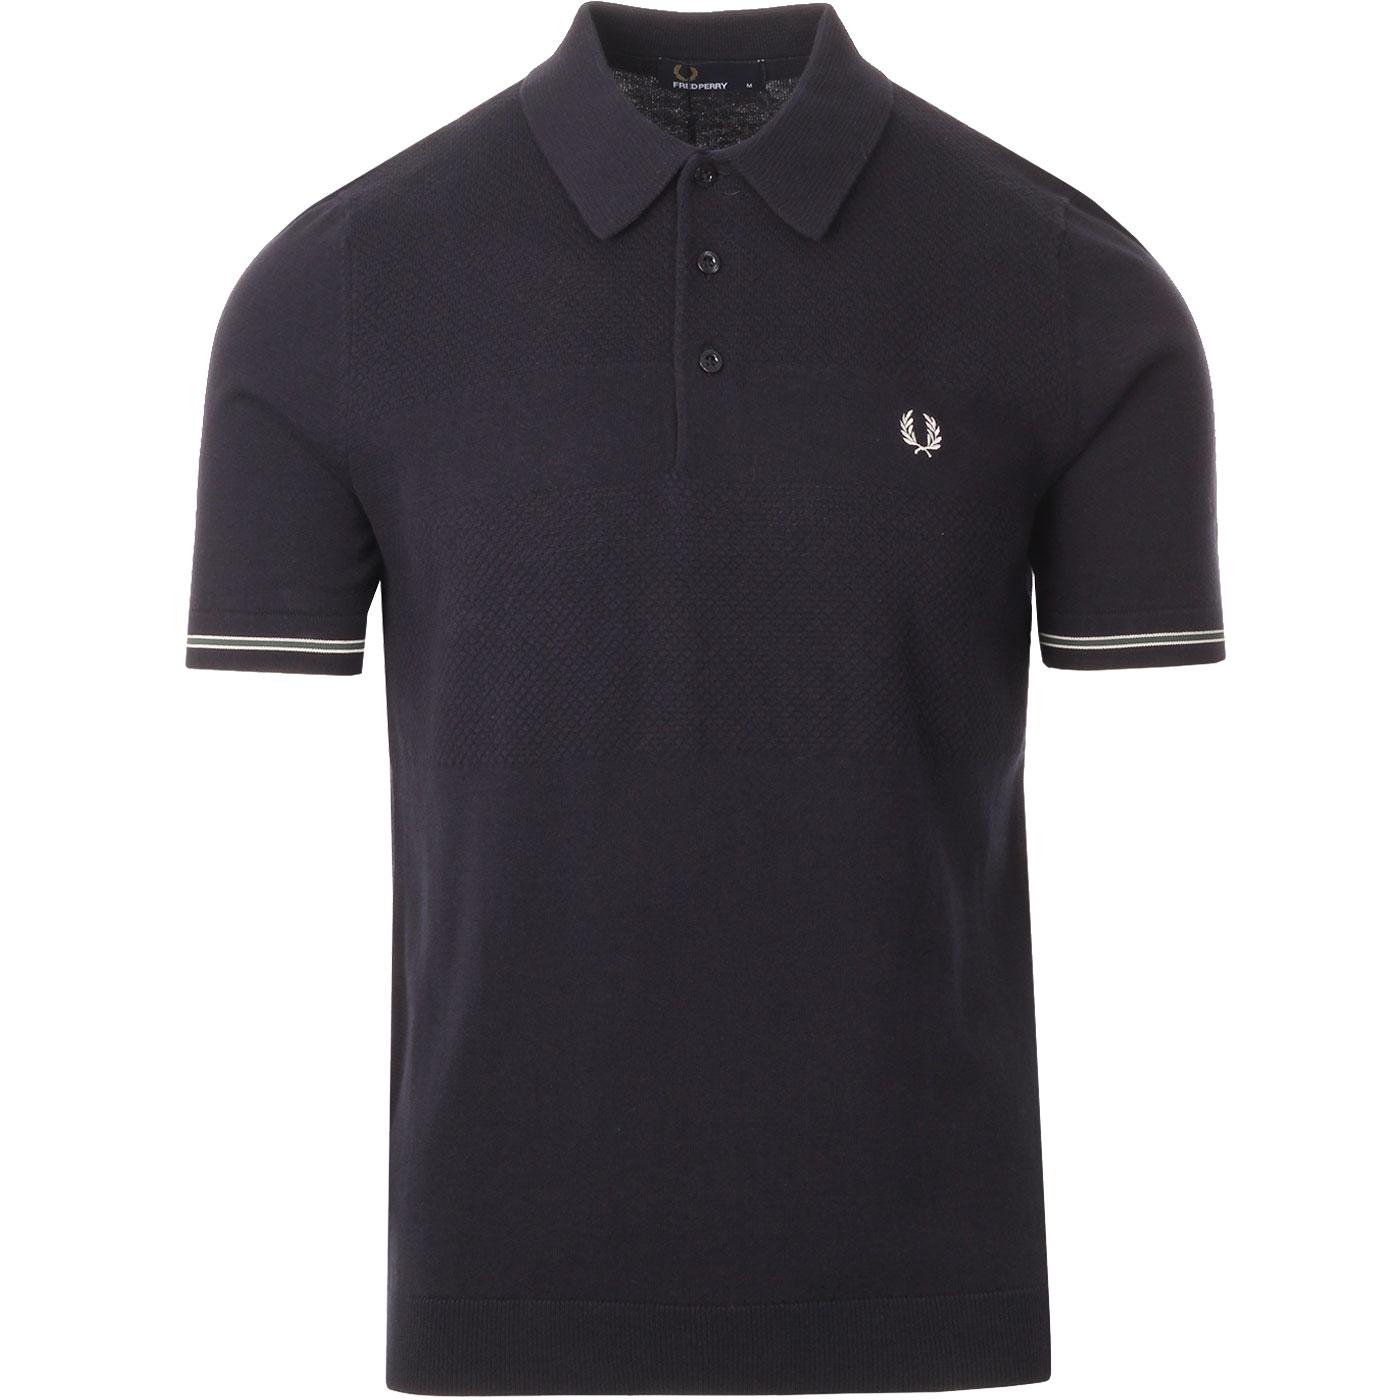 FRED PERRY Pique Texture Knitted Mod Polo Shirt N